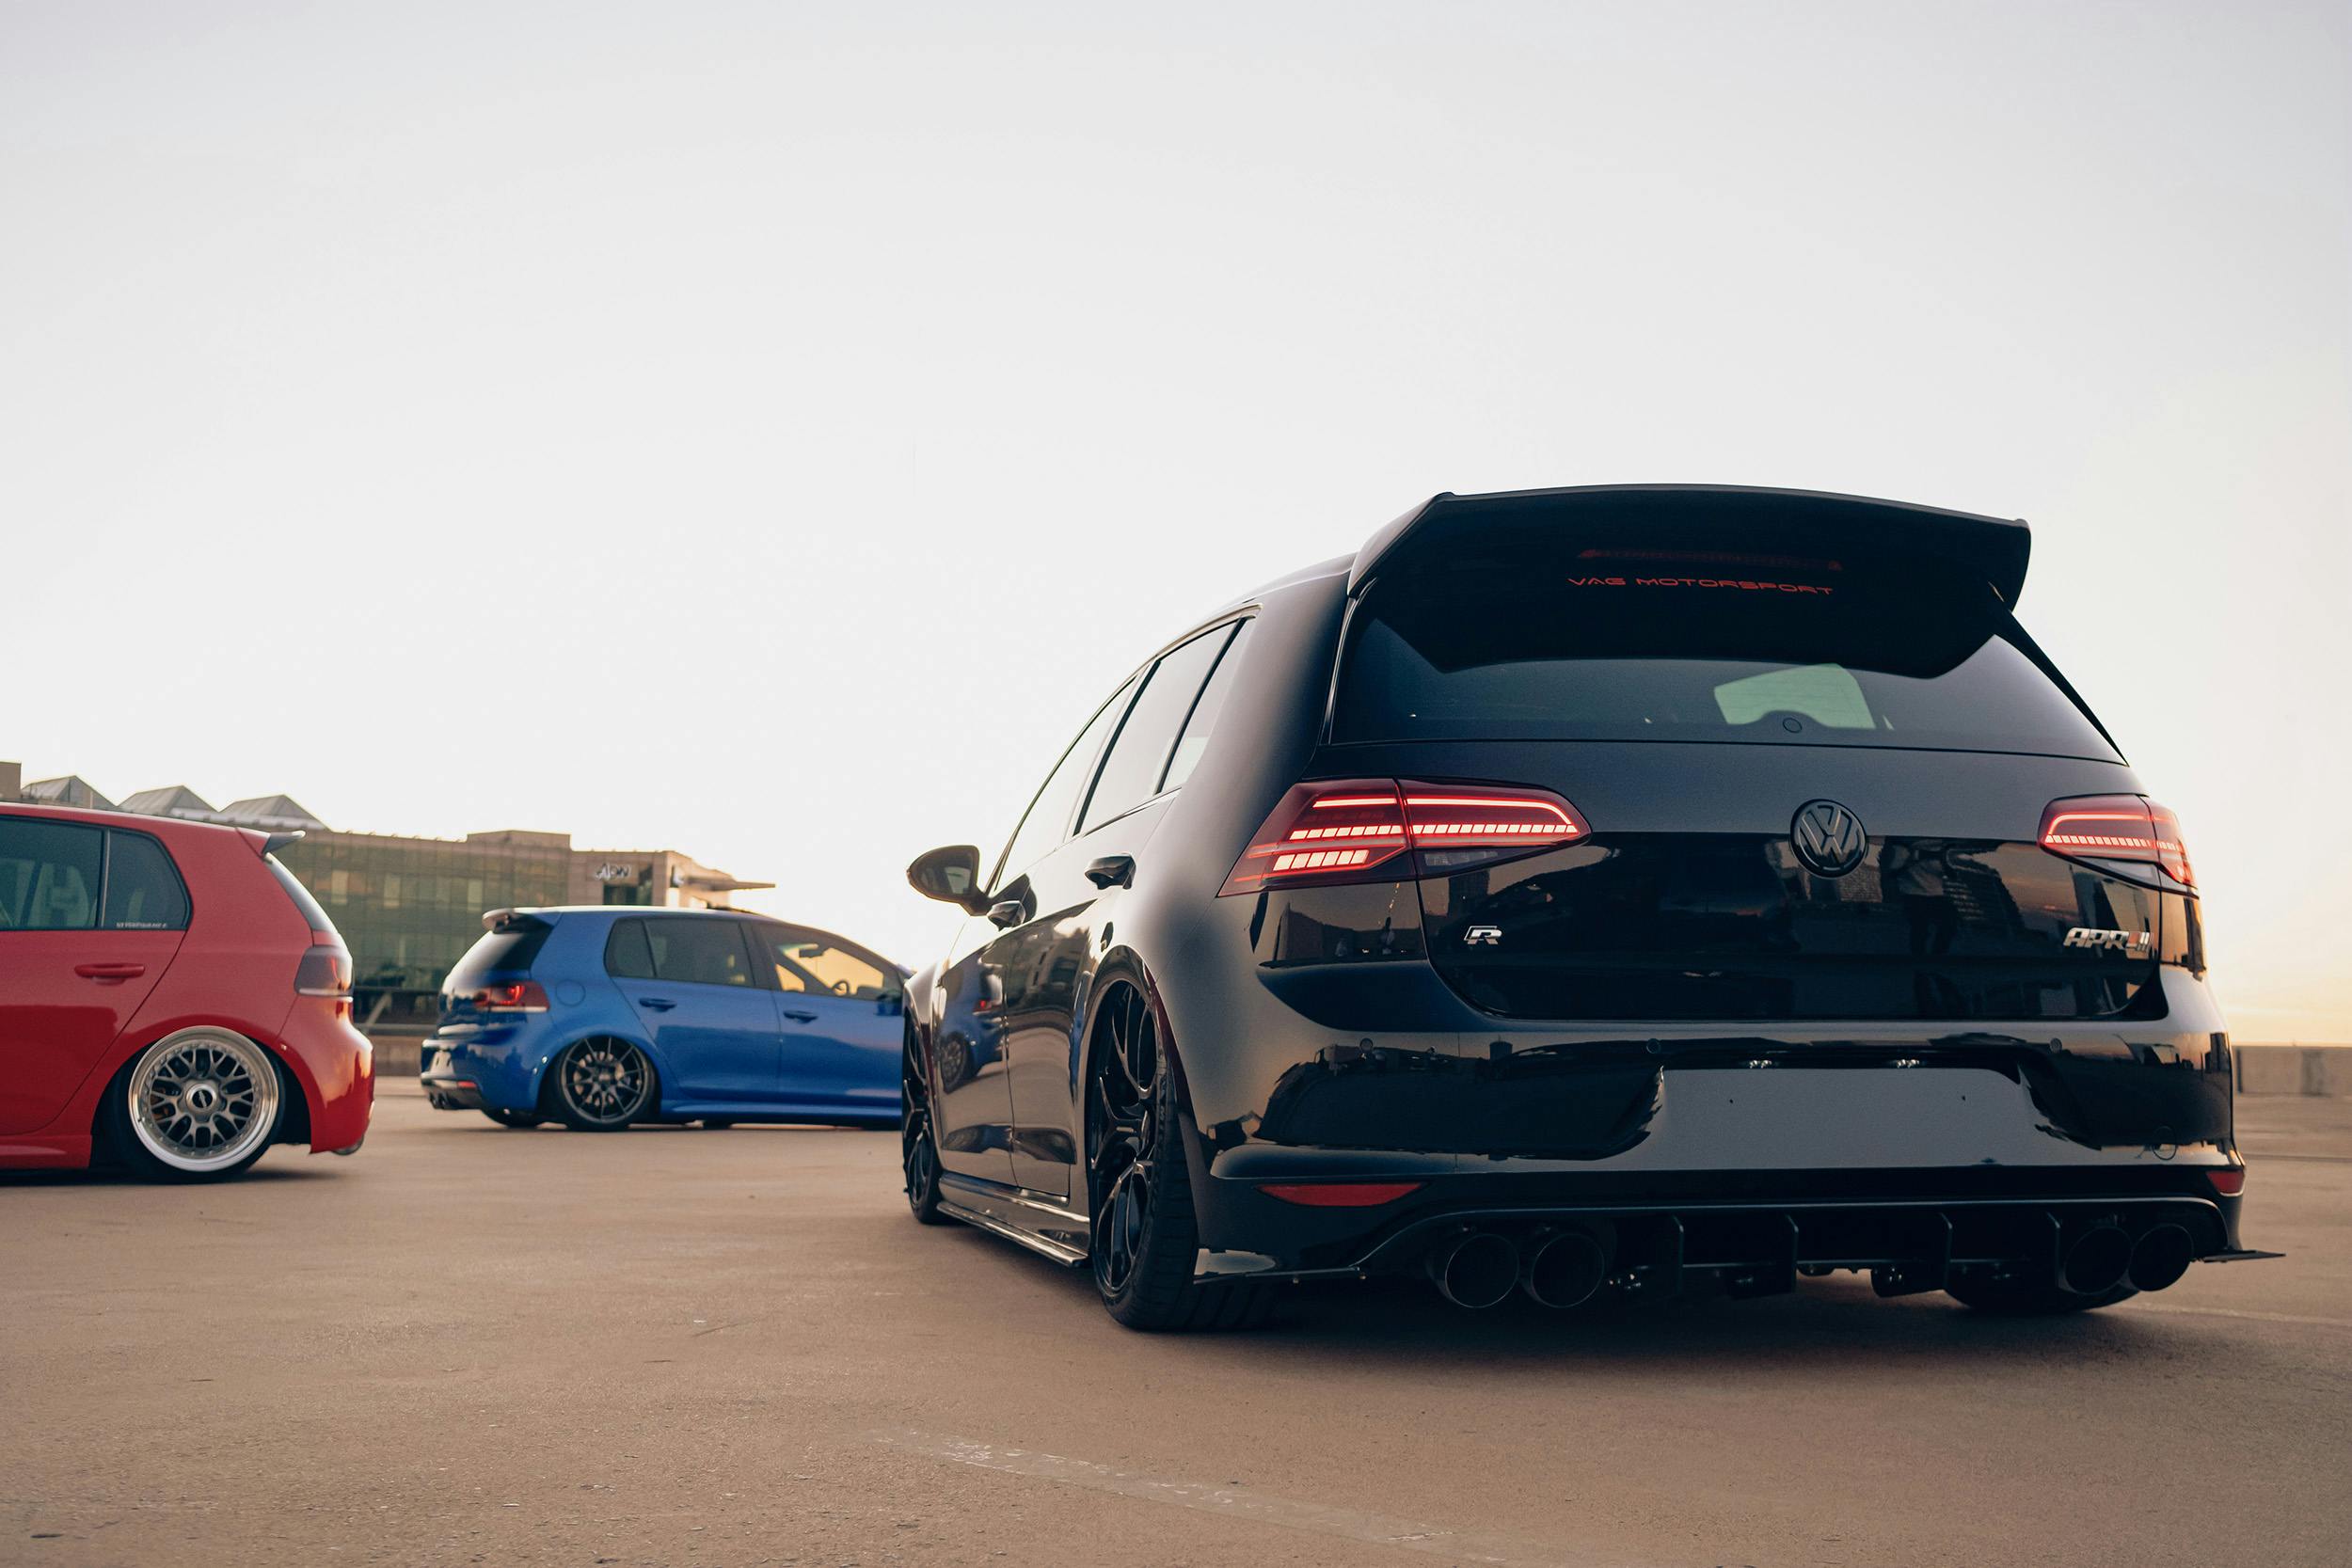 Air Lift Performance Around The World South Africa - VW Golf R trio laid out